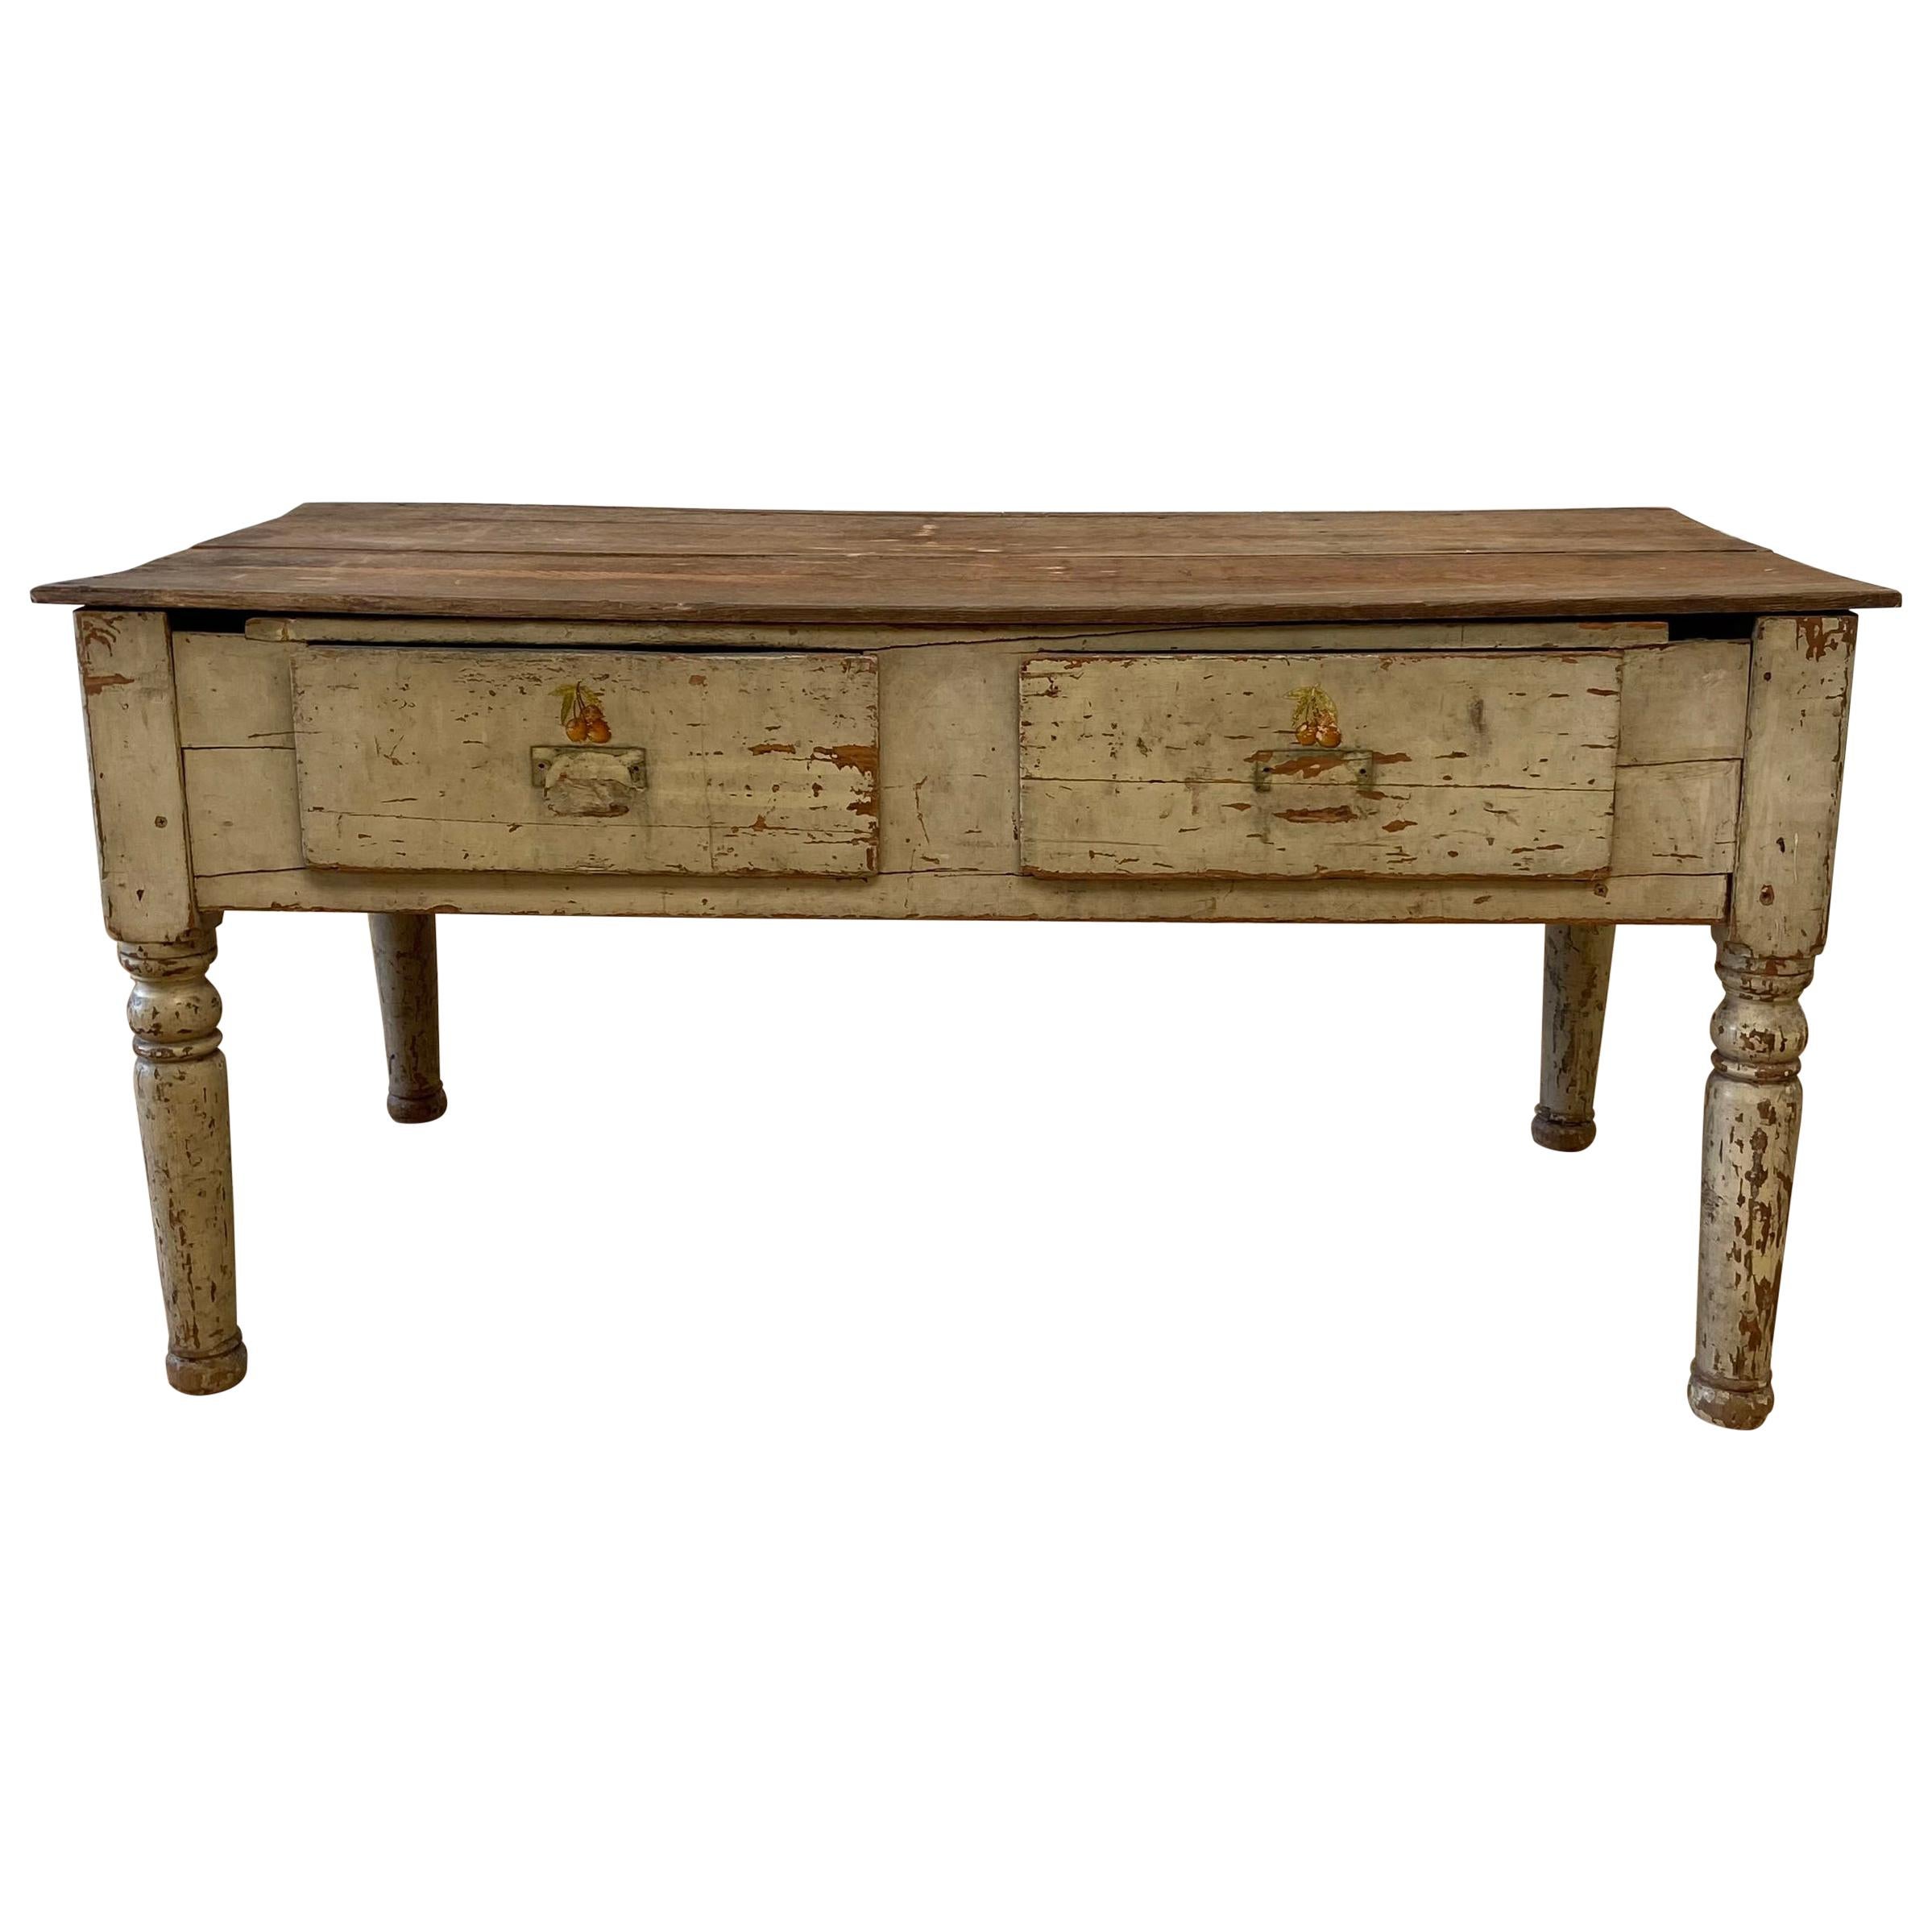 Antique Rustic Primitive Style Low Table or Coffee Table For Sale